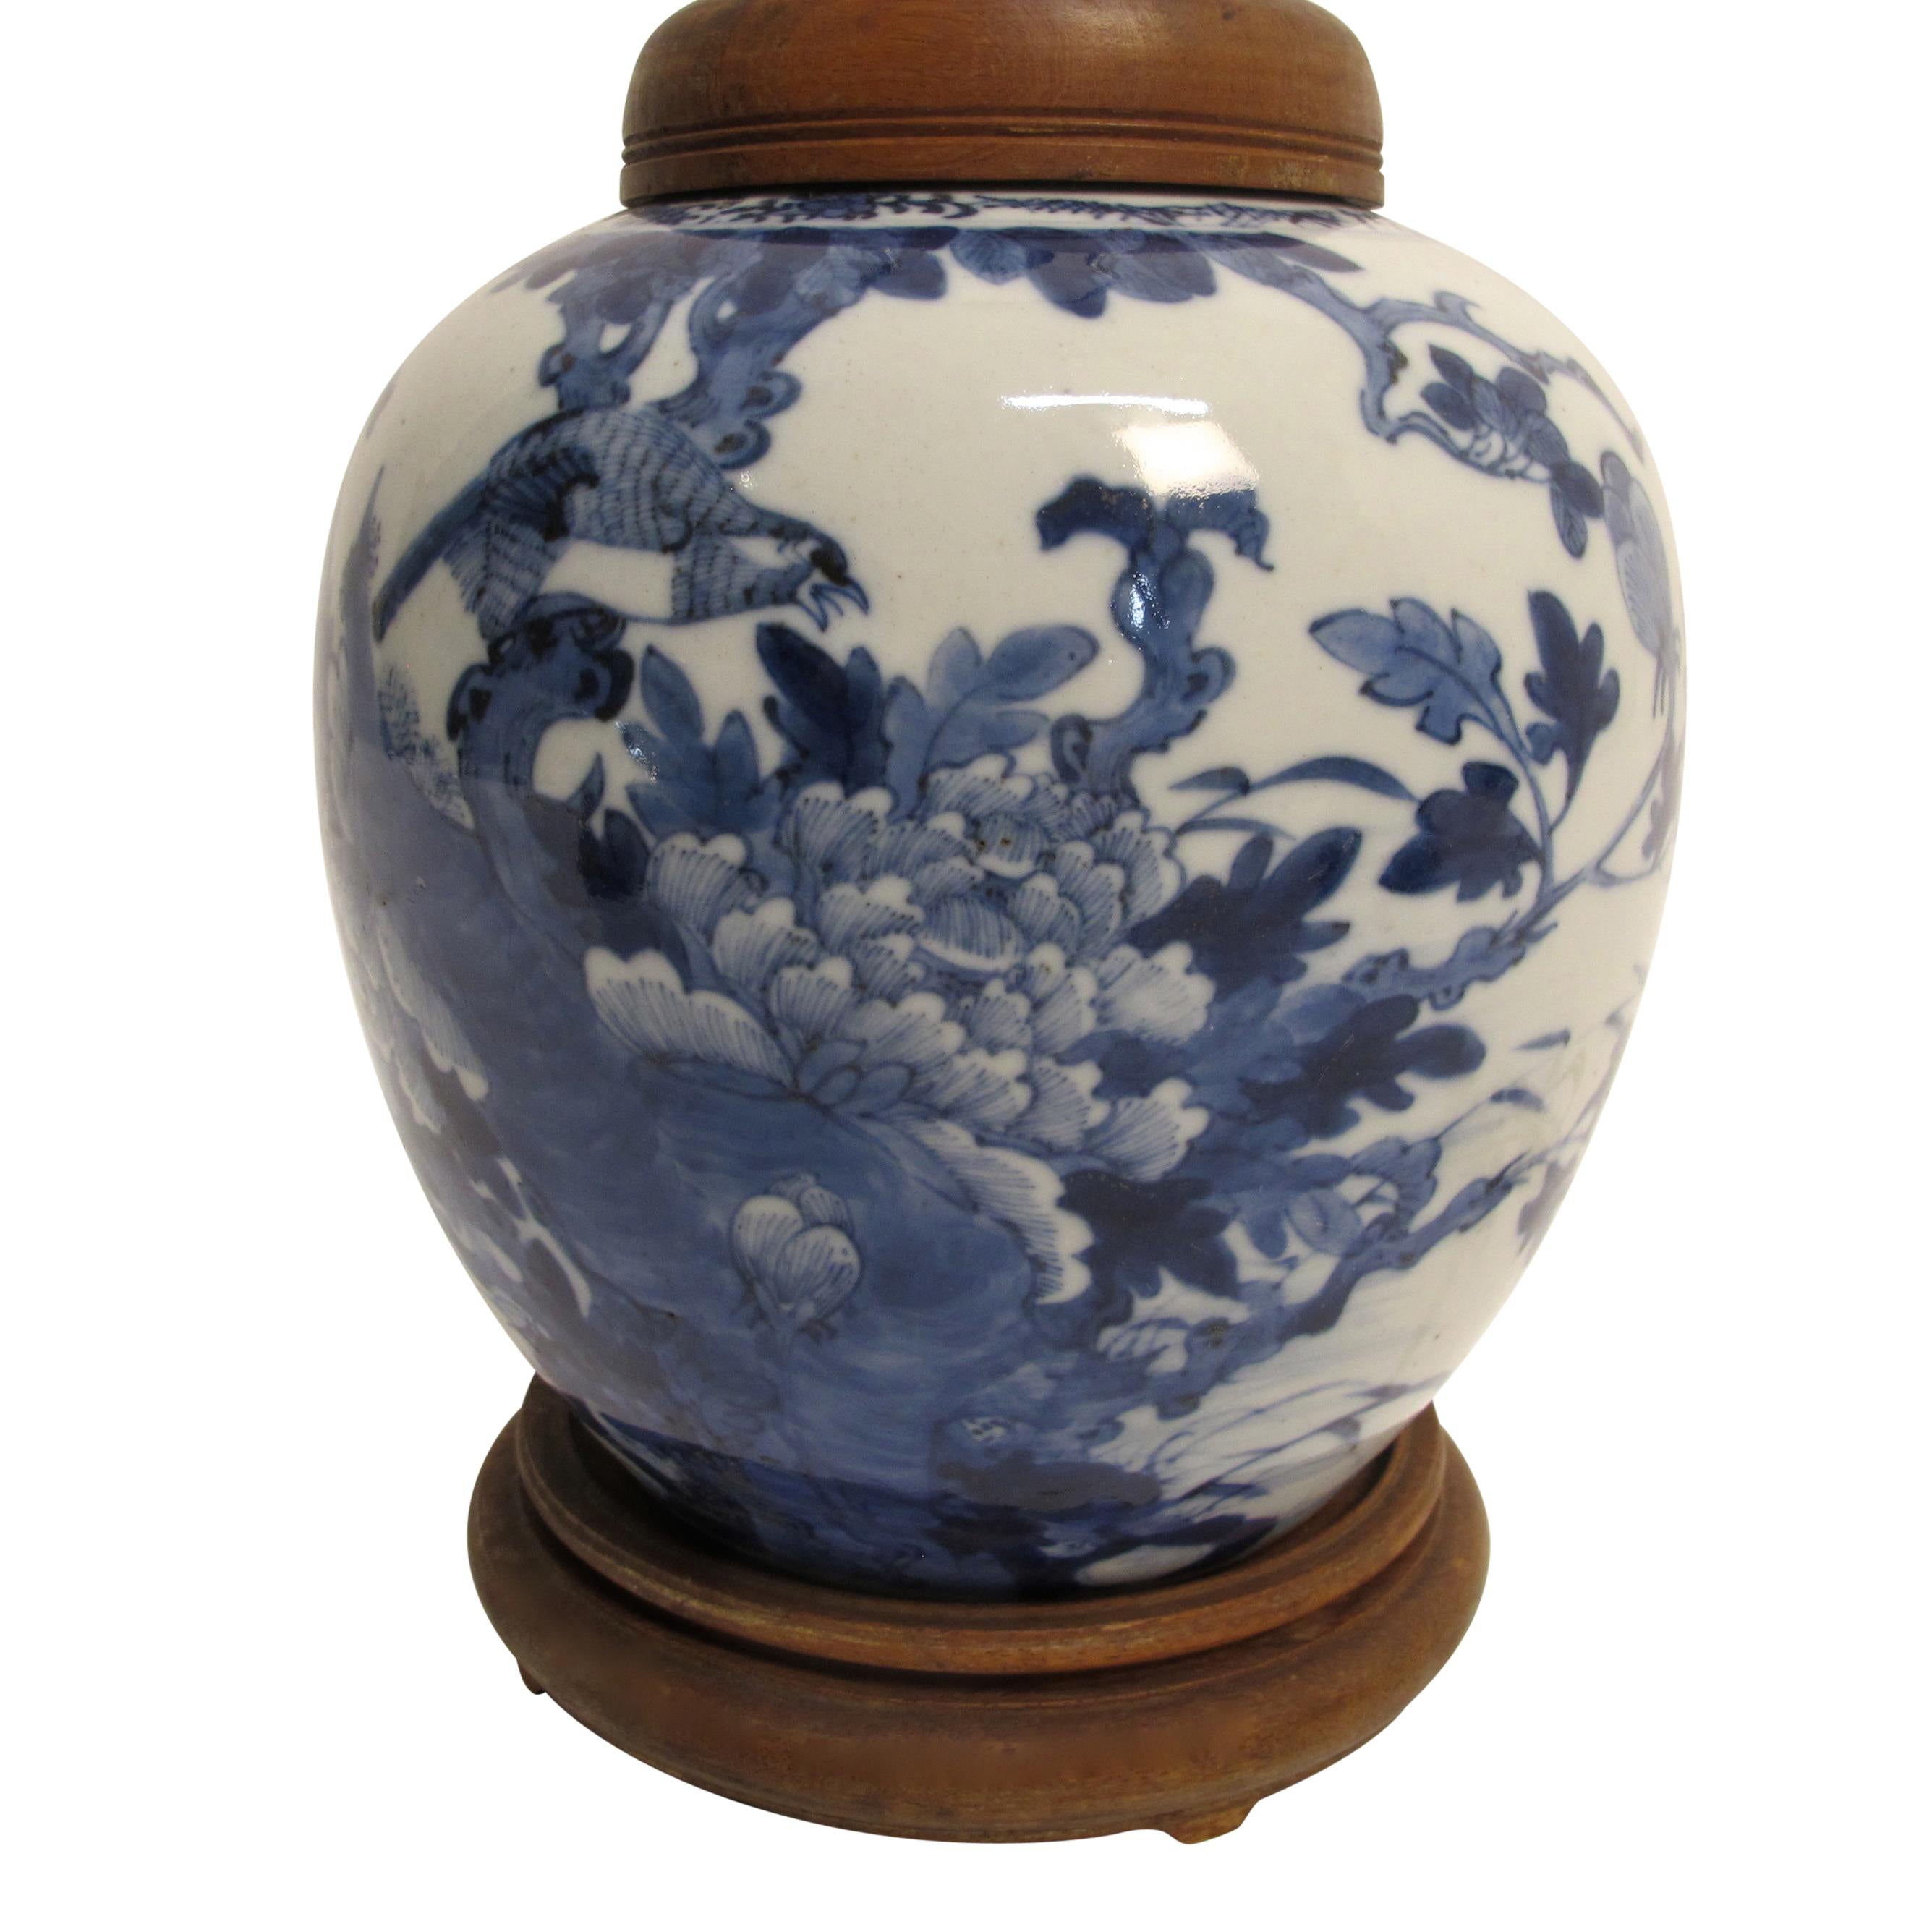 Blue and white hand-painted porcelain ginger jar converted to a table lamp in the early 20th century. Beautifully painted and in fine condition, China, early 19th century.